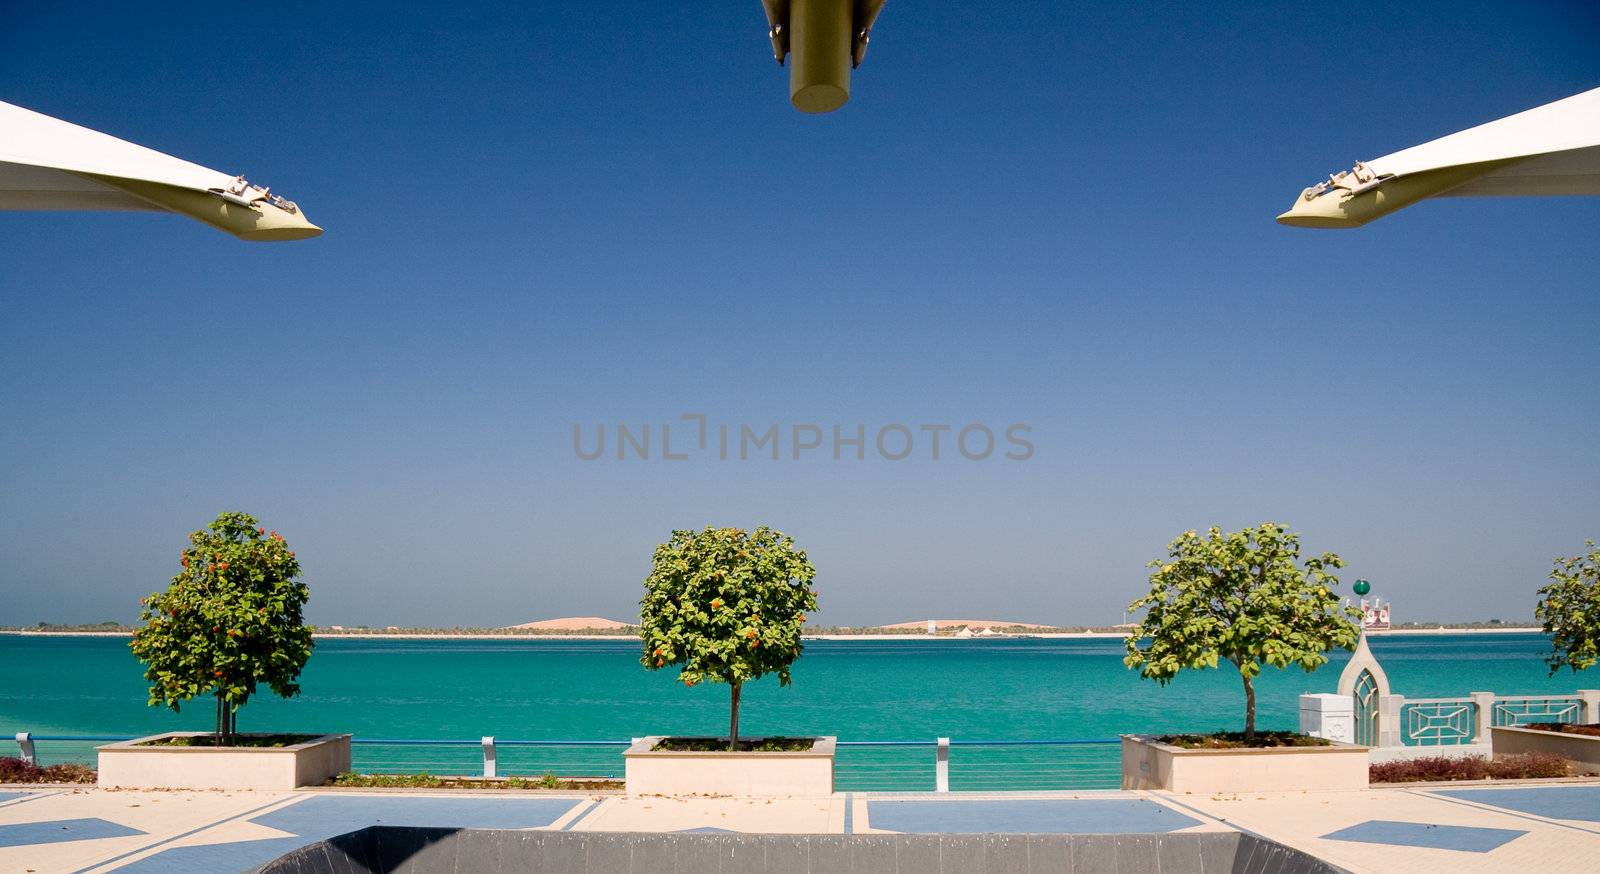 View of gulf in Abu Dhabi framed by trees and showing distant sand dunes